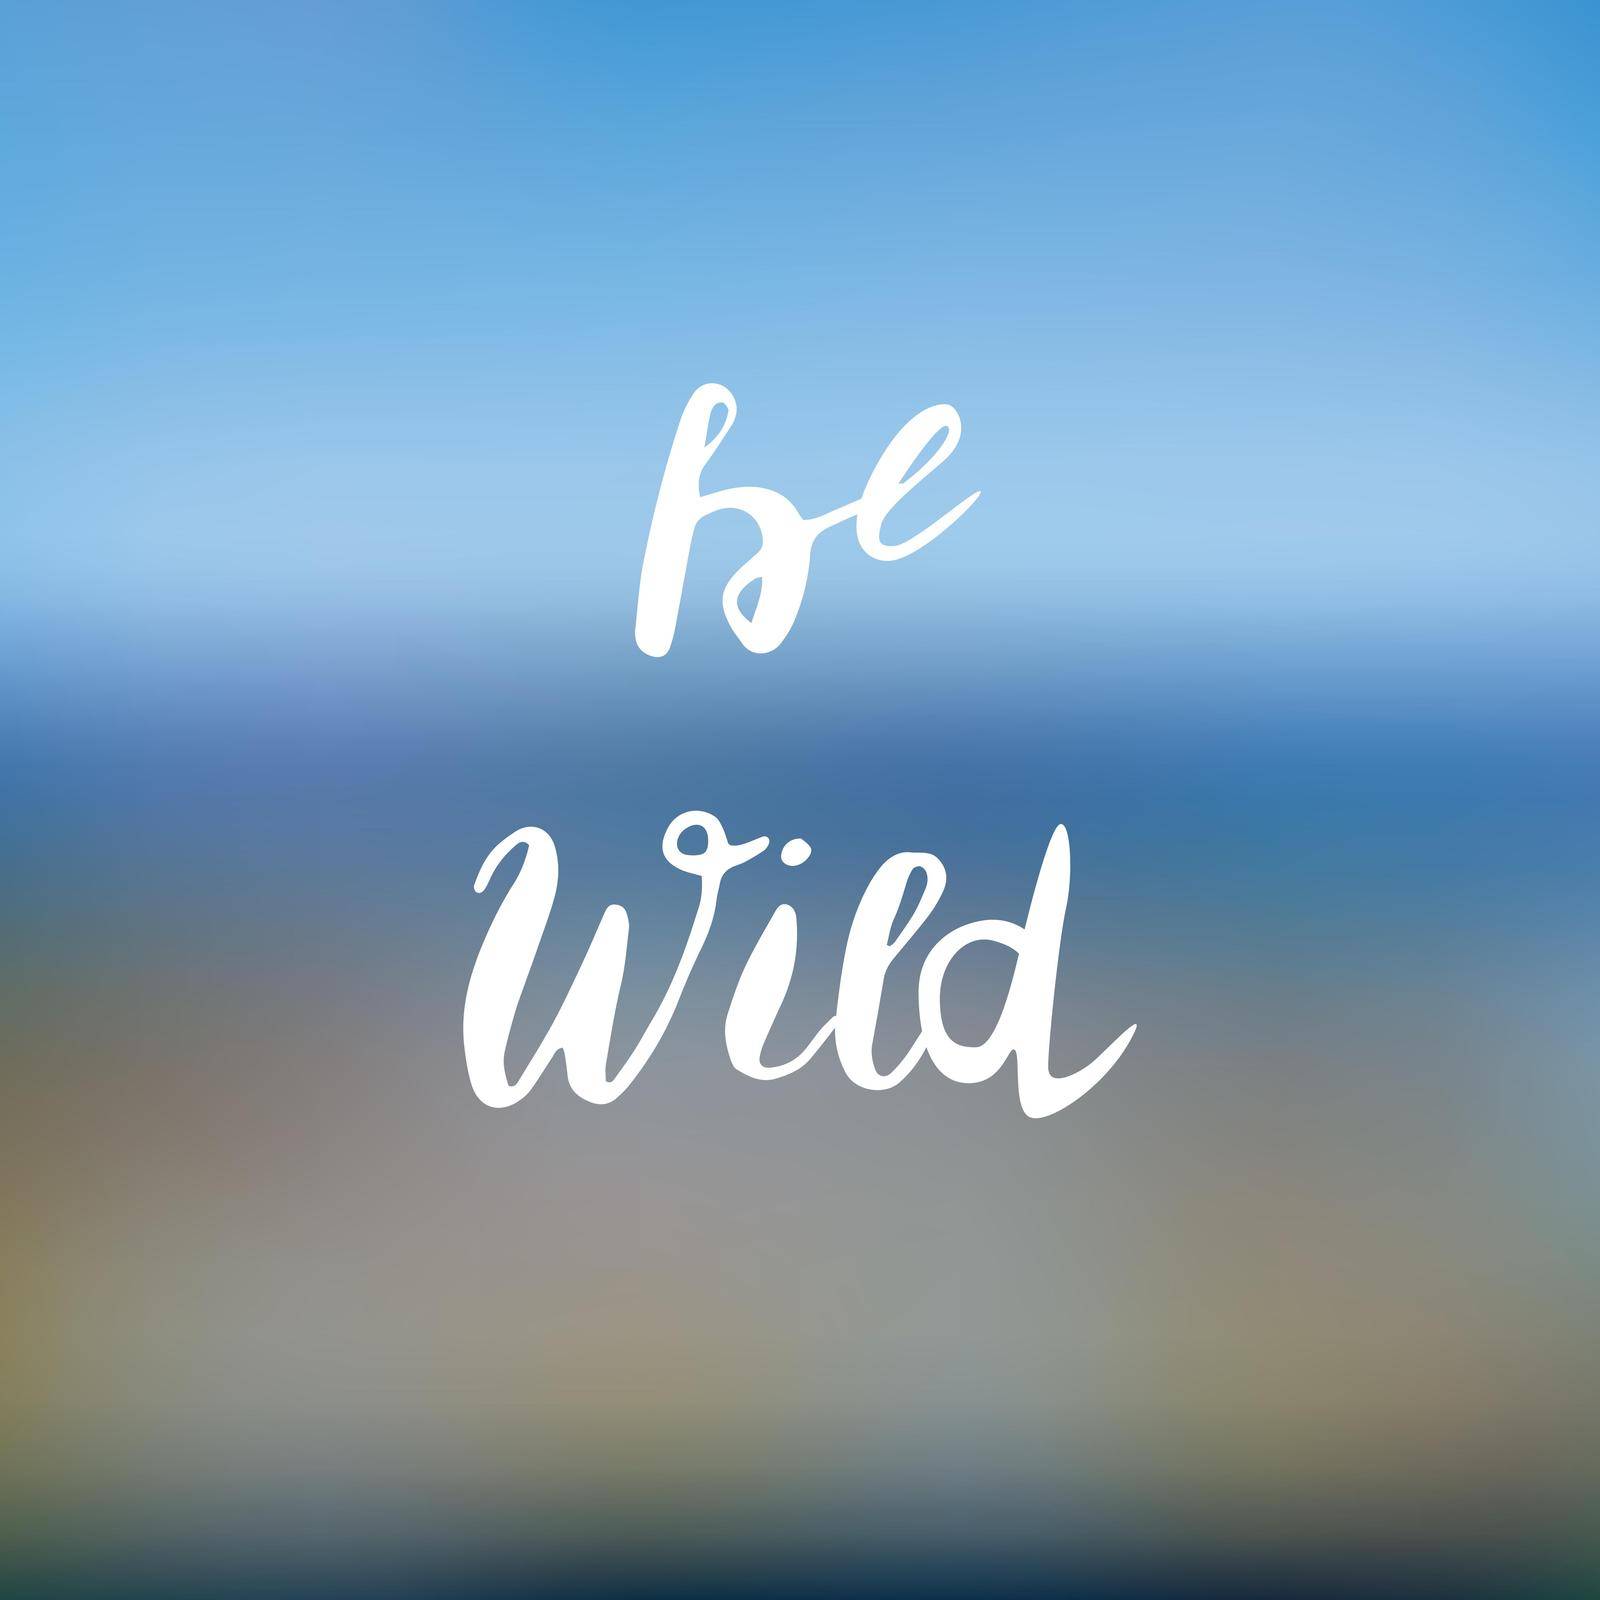 Be wild lettering by LyannaDesign